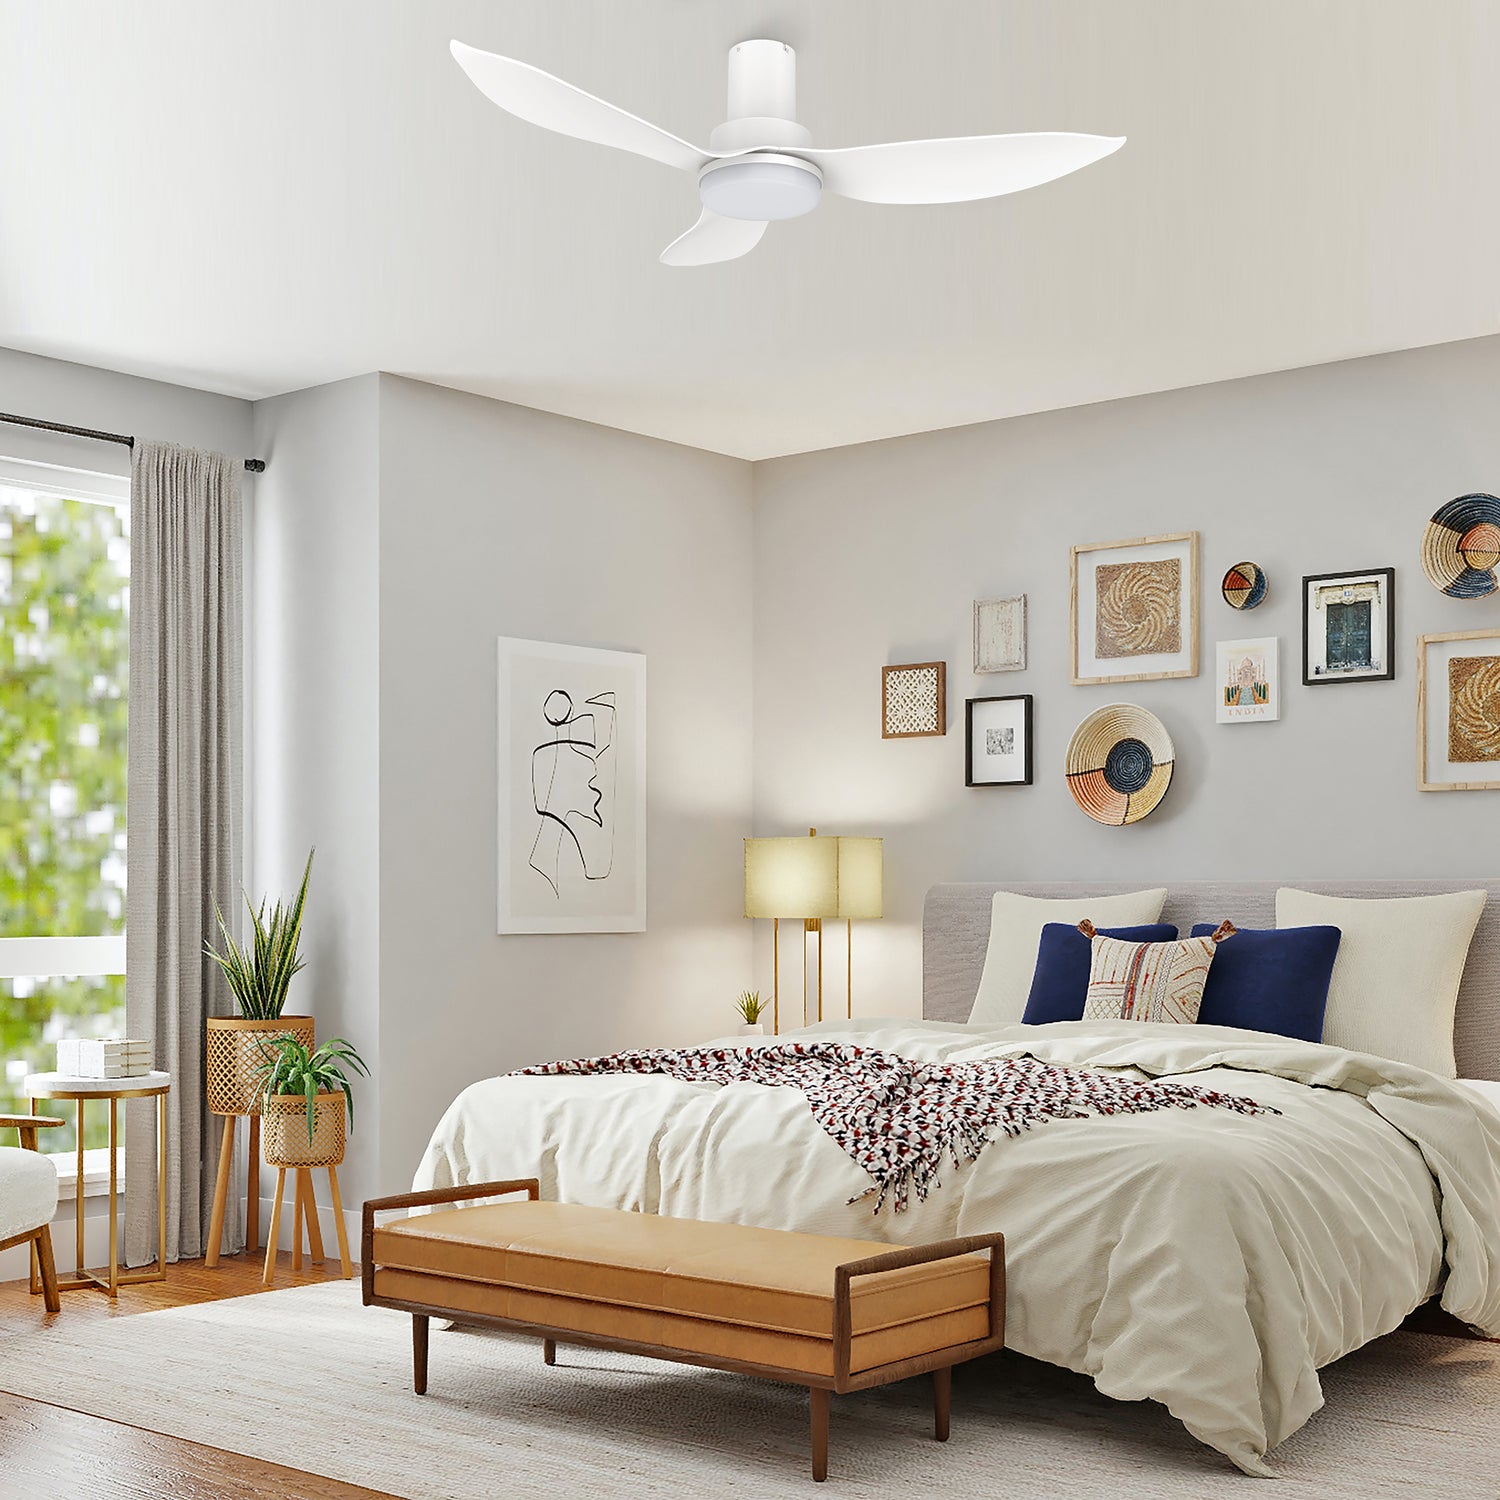 Designed to cool and light even the smallest of spaces, the Smafan Prescott 36” smart ceiling fan is created with revolutionary motor and lighting technology for a remarkable performance. The Prescott features a crisp and white finish with elegant blades and modern accents to perfectly complement the décor of your preference.